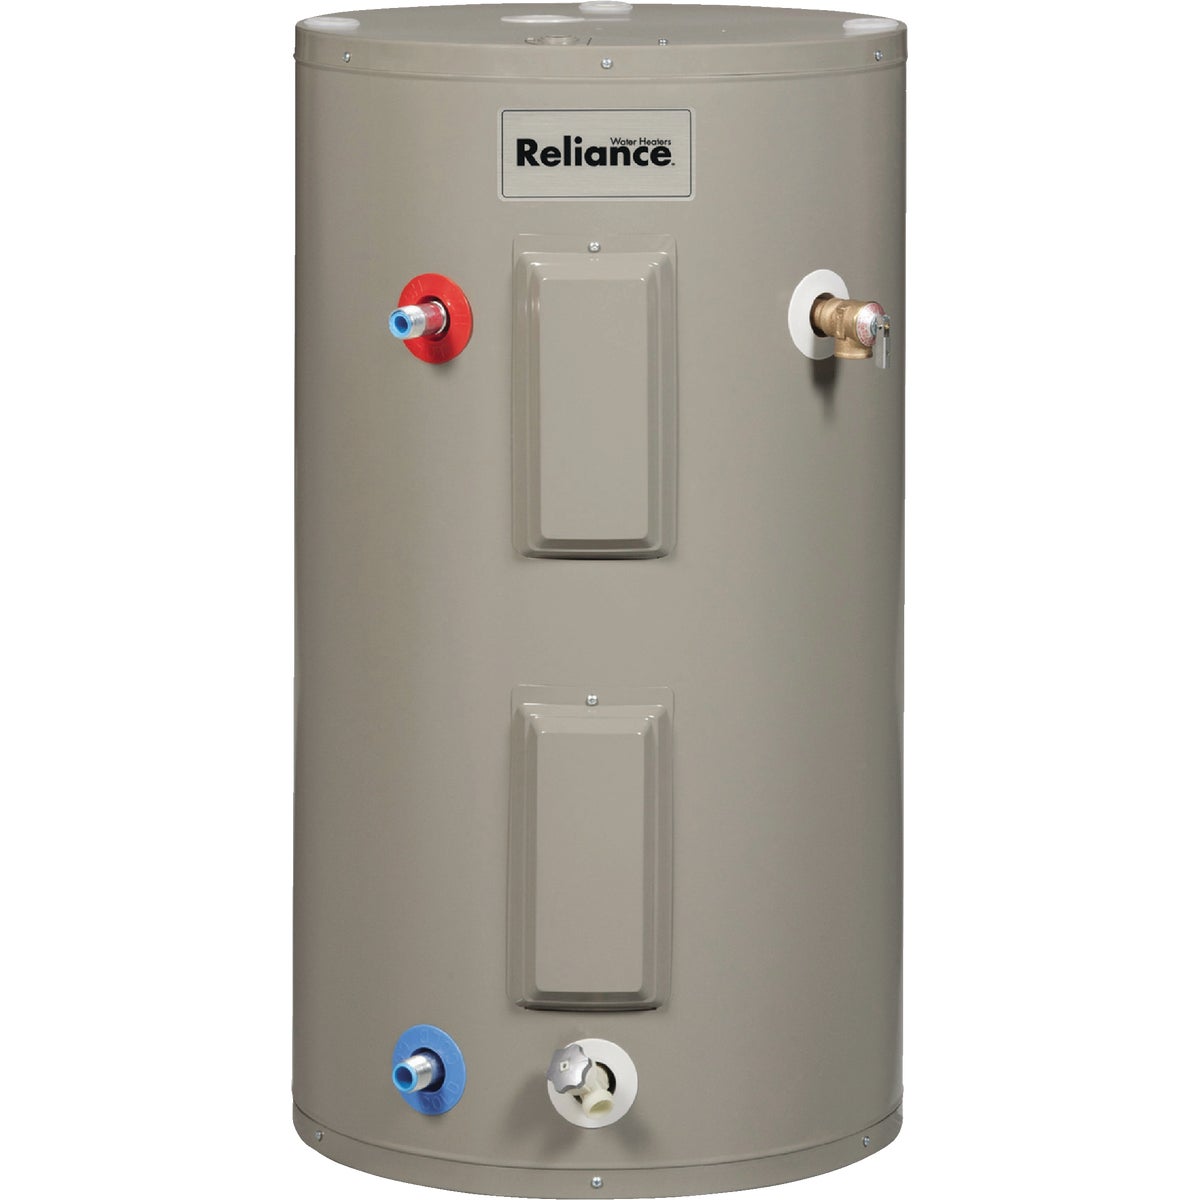 Item 401936, Reliance 30 gallon, electric water heater. Mobile Home, dual 3800W, 240 V.